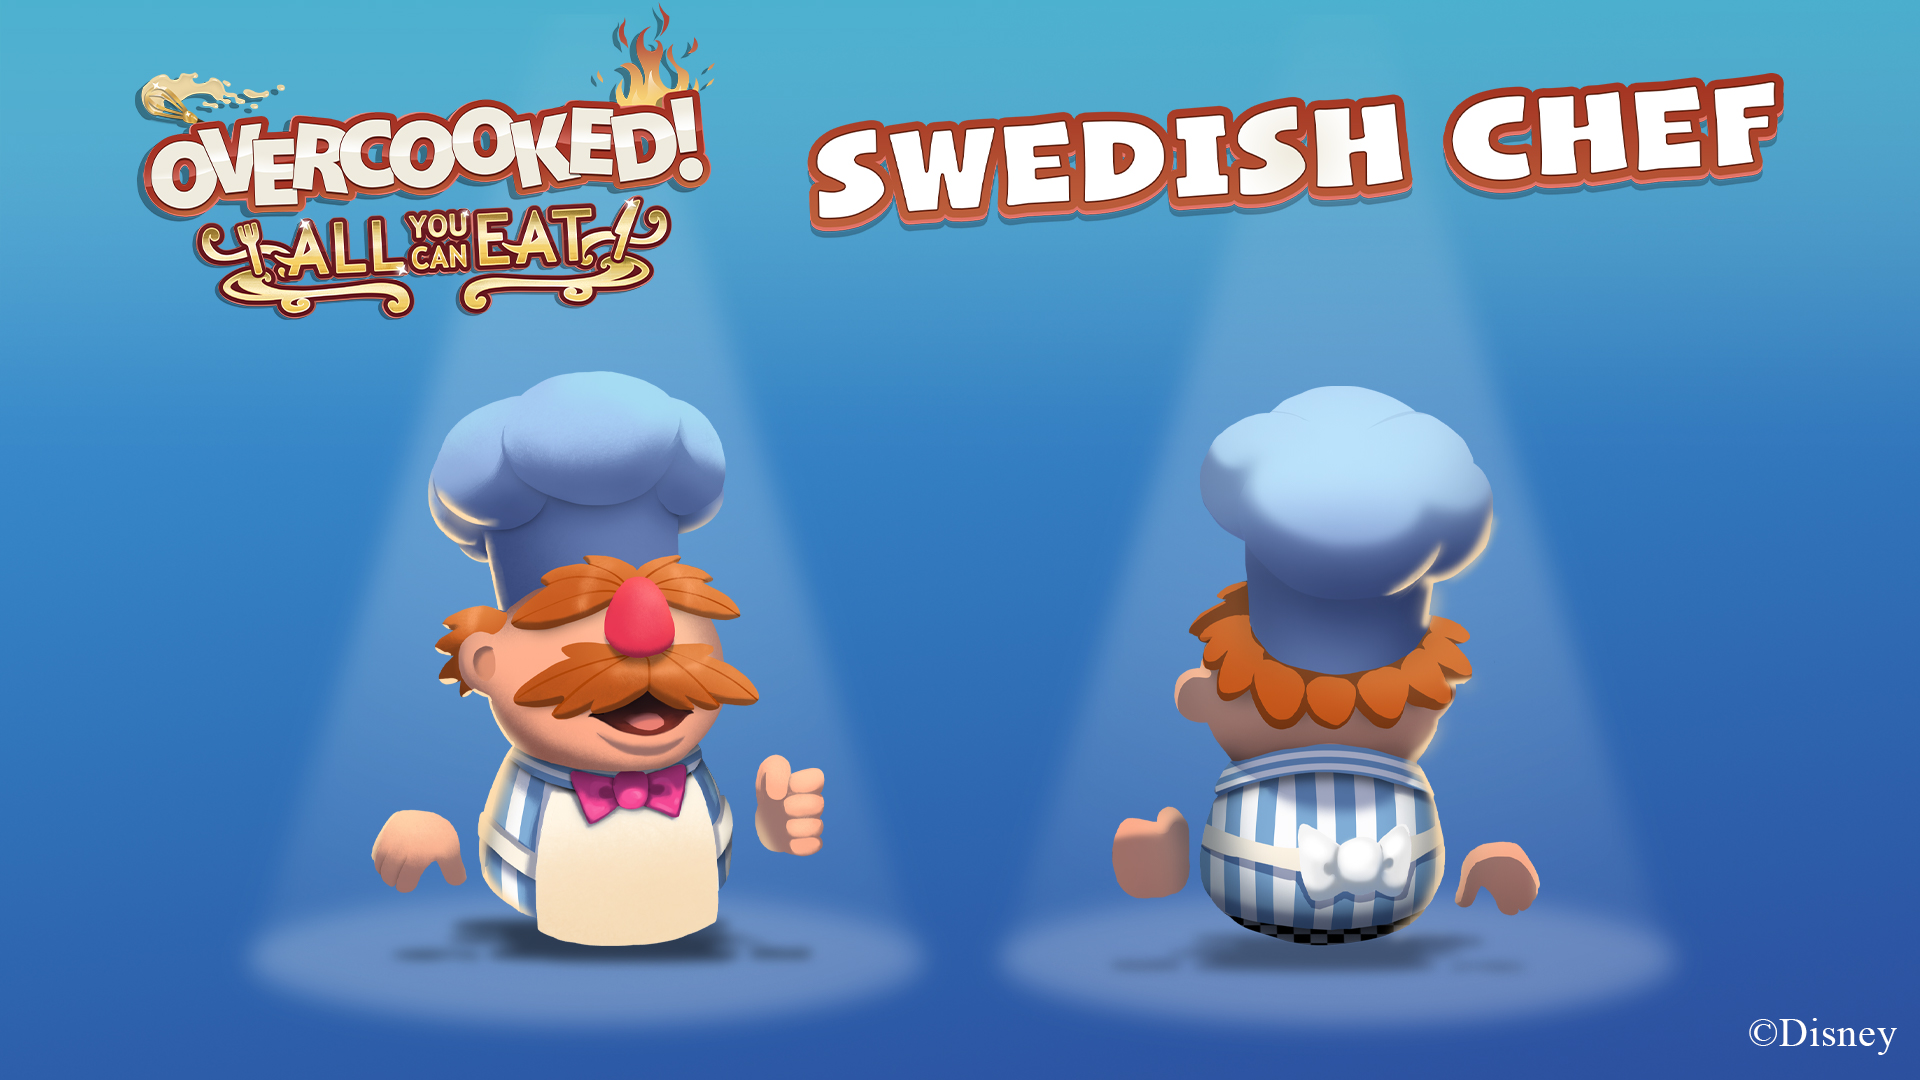 Overcooked! All You Can Eat - Swedish Chef